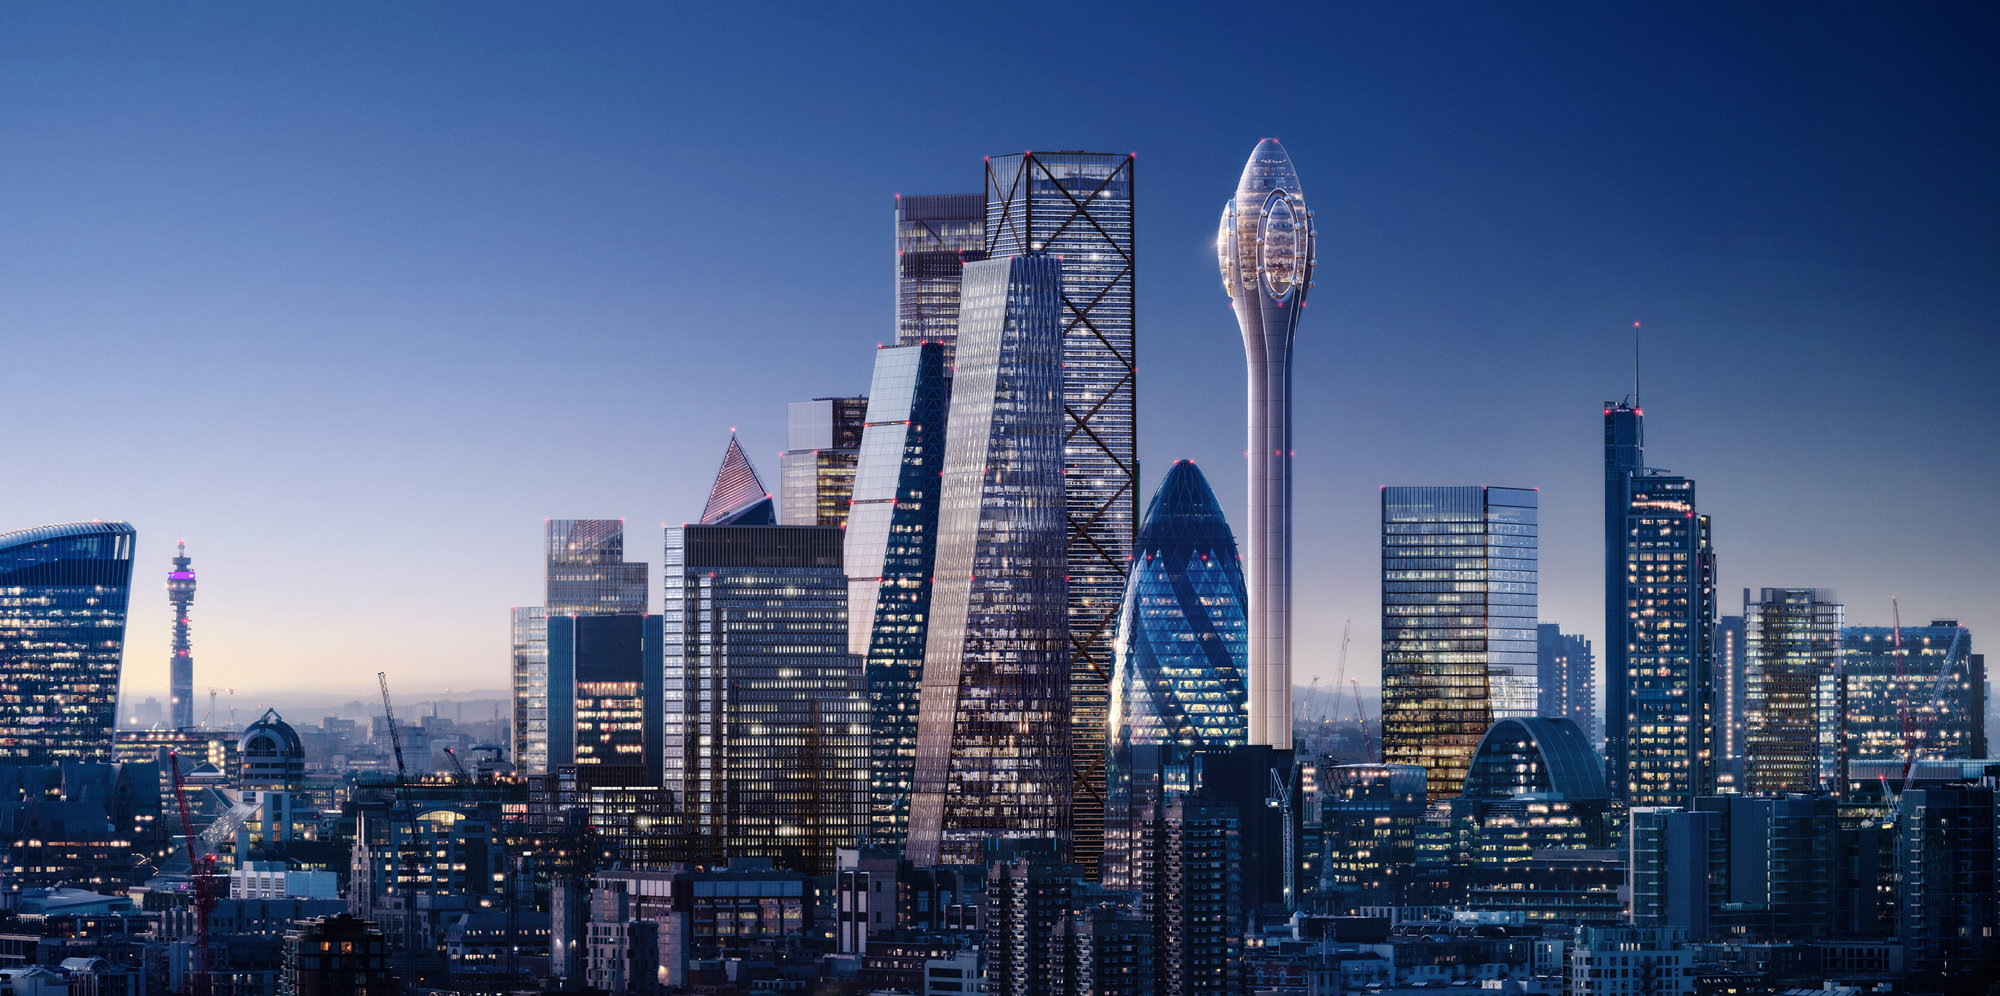 The Tulip: A New Public Cultural And Tourist Attraction Proposed For The City Of London